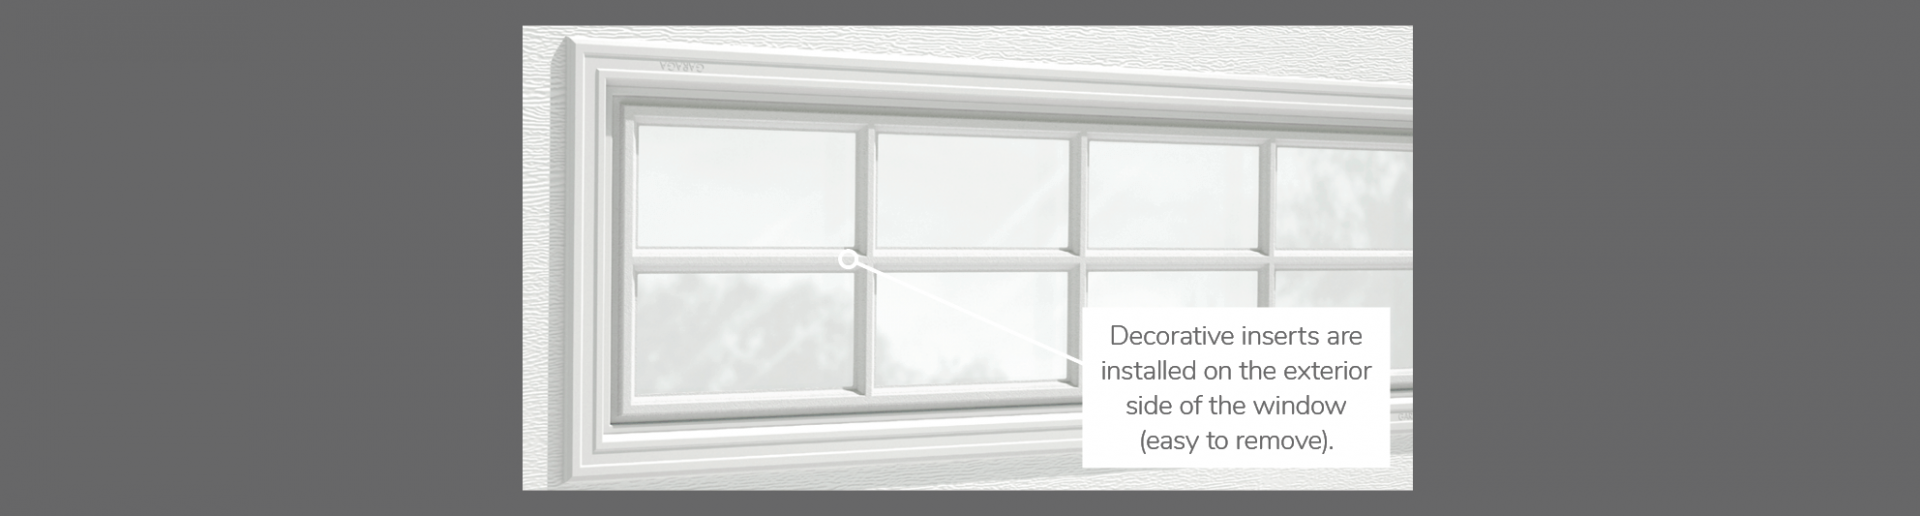 Stockton Decorative Insert, 40" x 13", available for door R-16, R-12, 2 layers - Polystyrene and Non-insulated